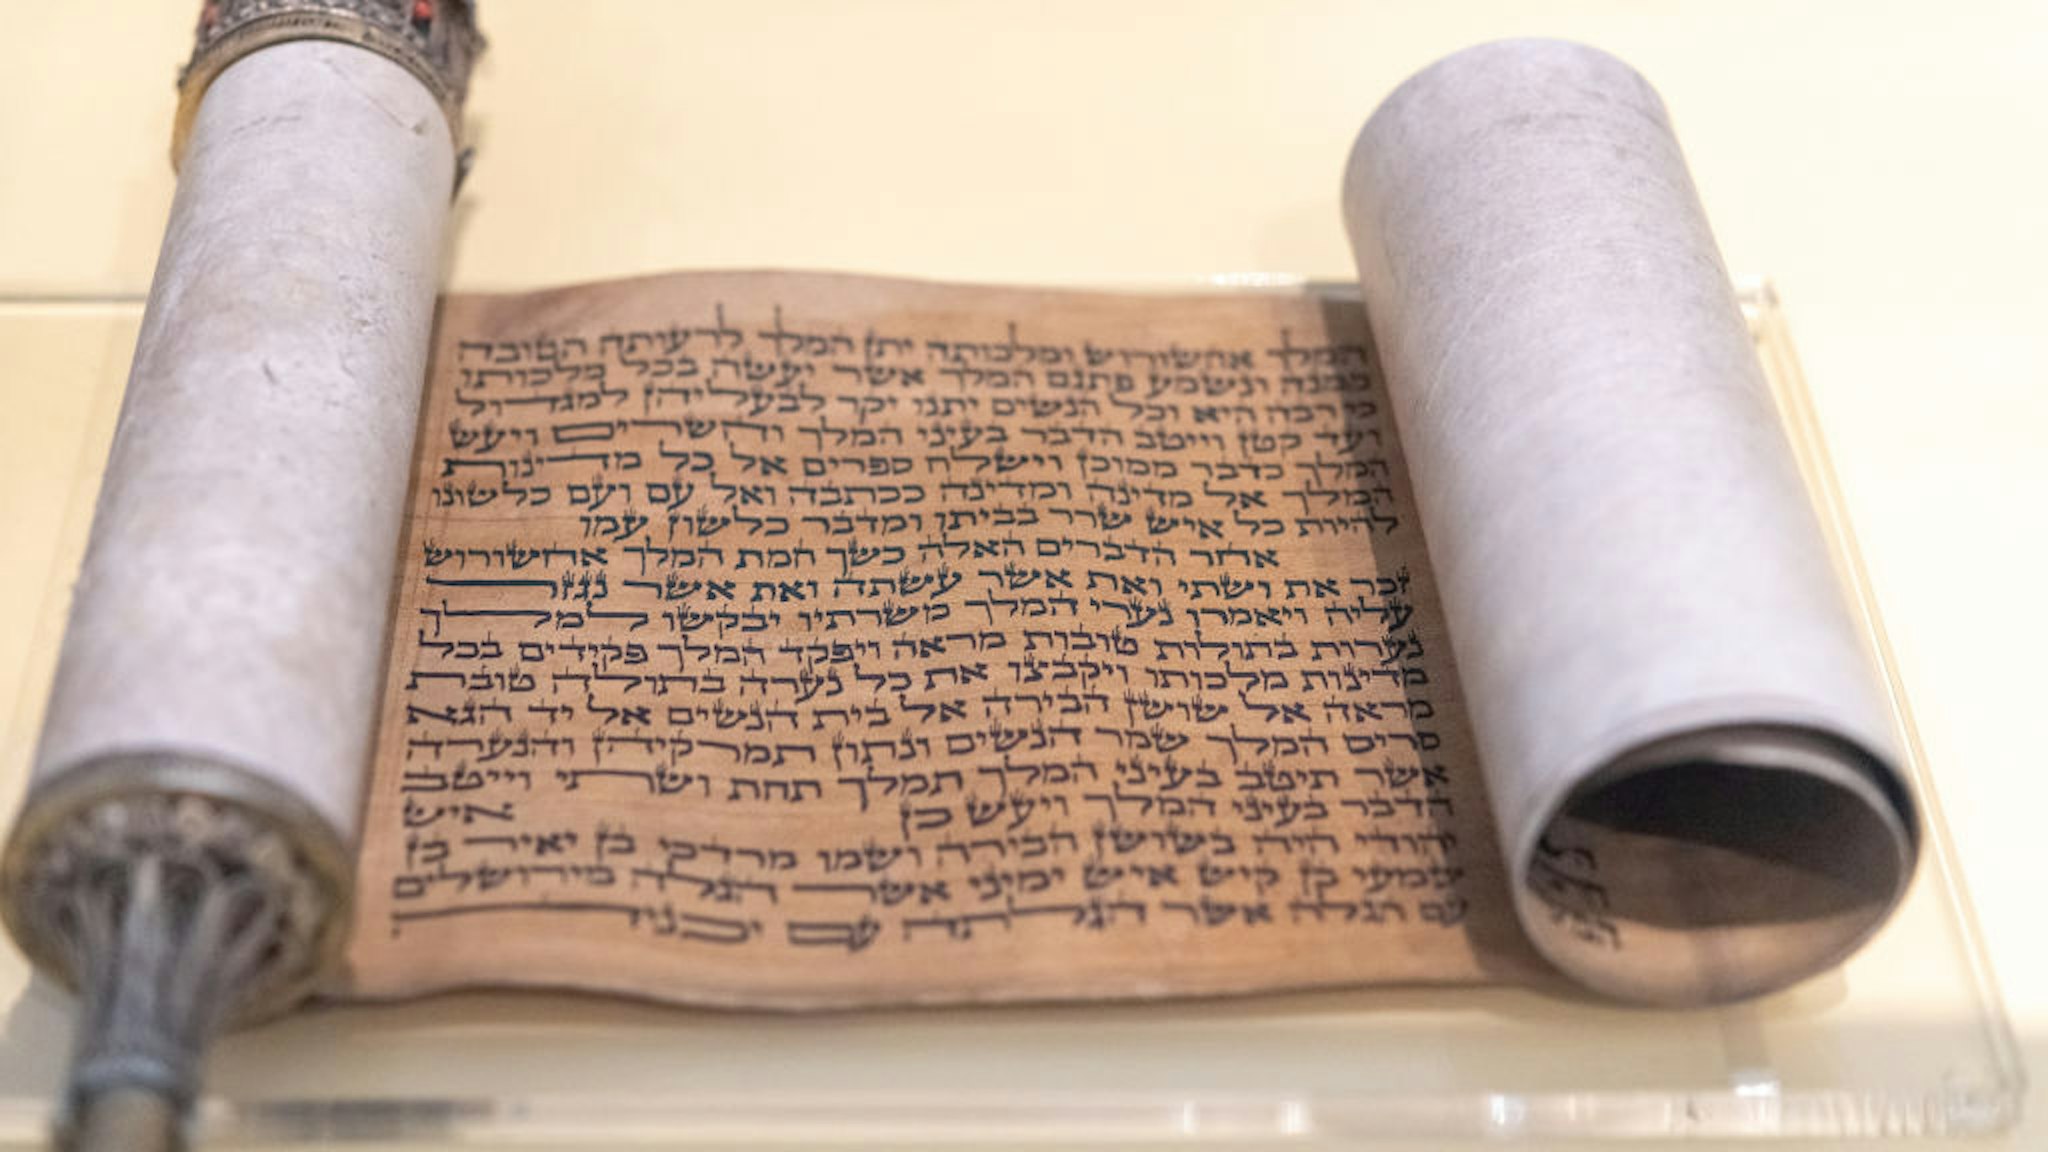 Antique Bible texts in exhibit at the Royal Ontario Museum